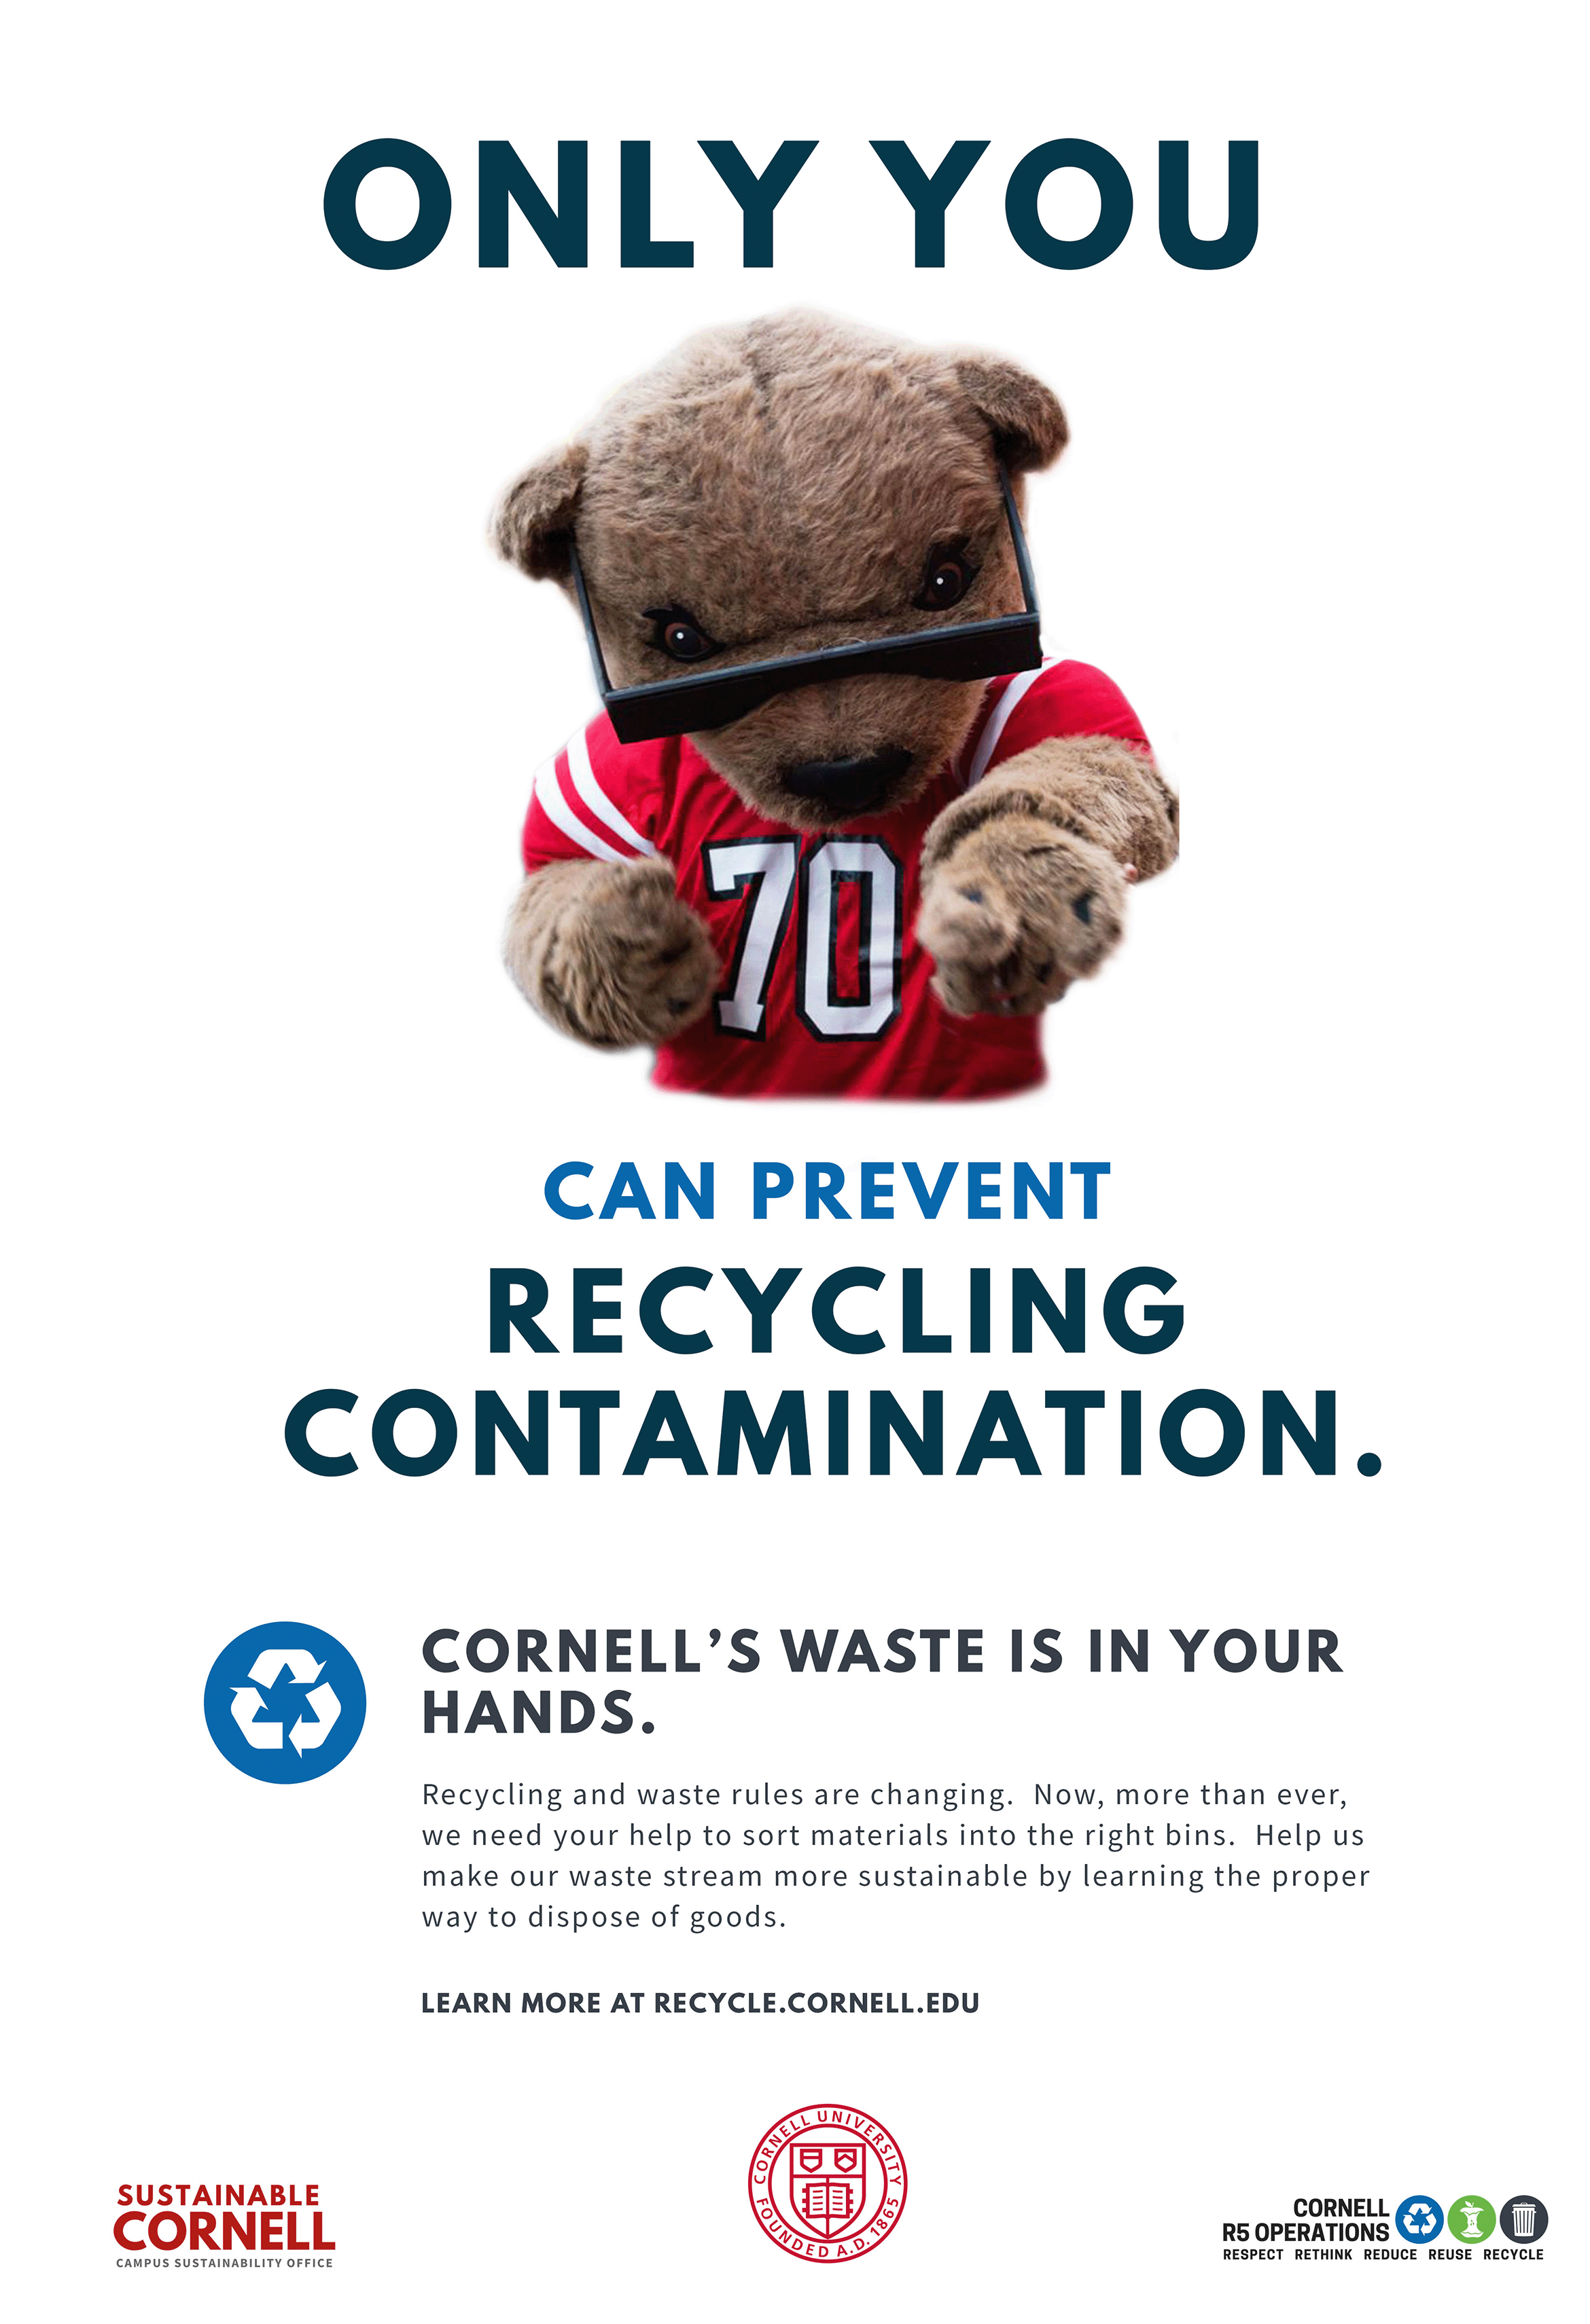 Poster with image of Big Red Bear pointing and text 'Only You can prevent recycling contamination.' Text below reads Cornell's waste is in your hands.